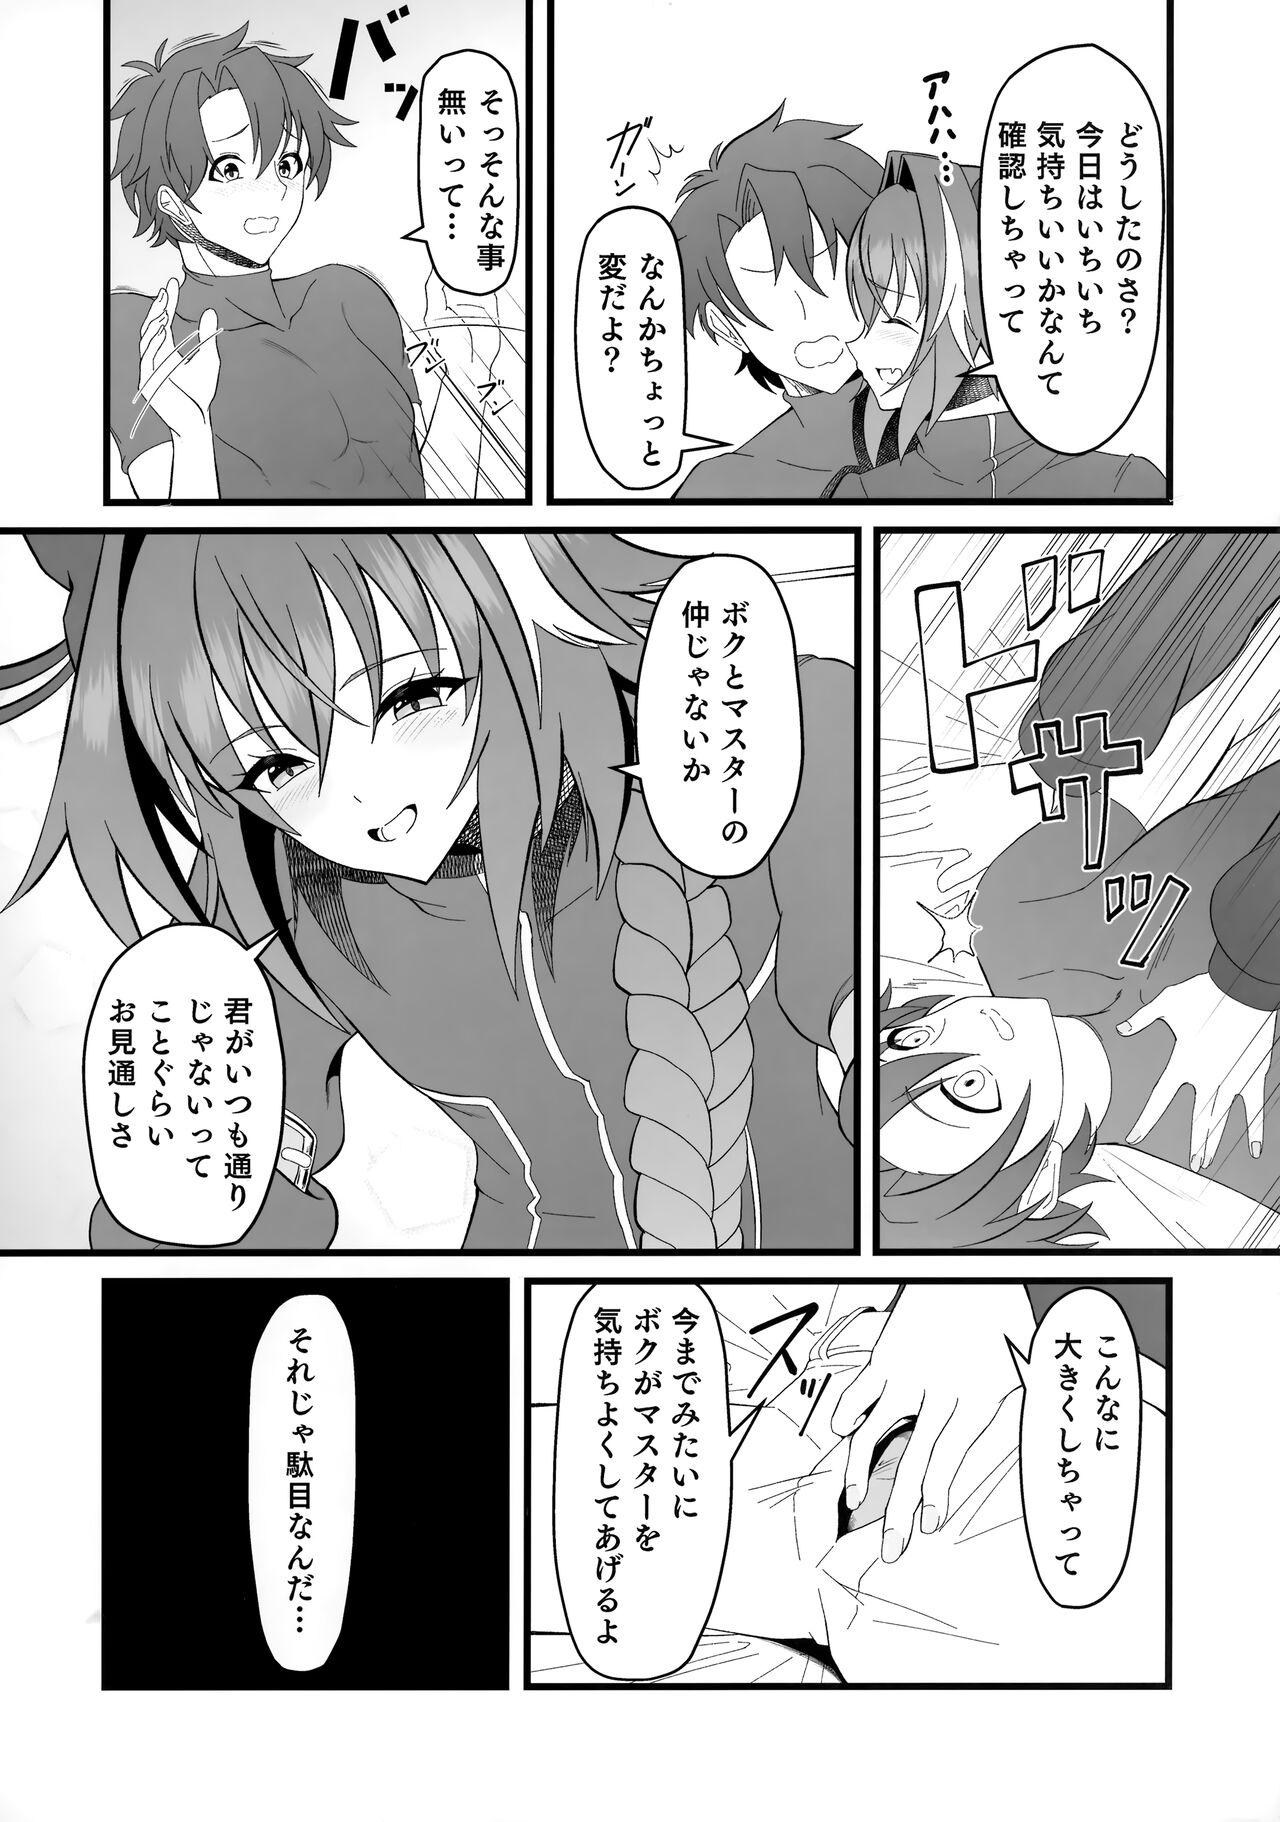 Tugging Kimi no Ichiban ni Naritakute - I wanted to be your number one. - Fate grand order Closeup - Page 7